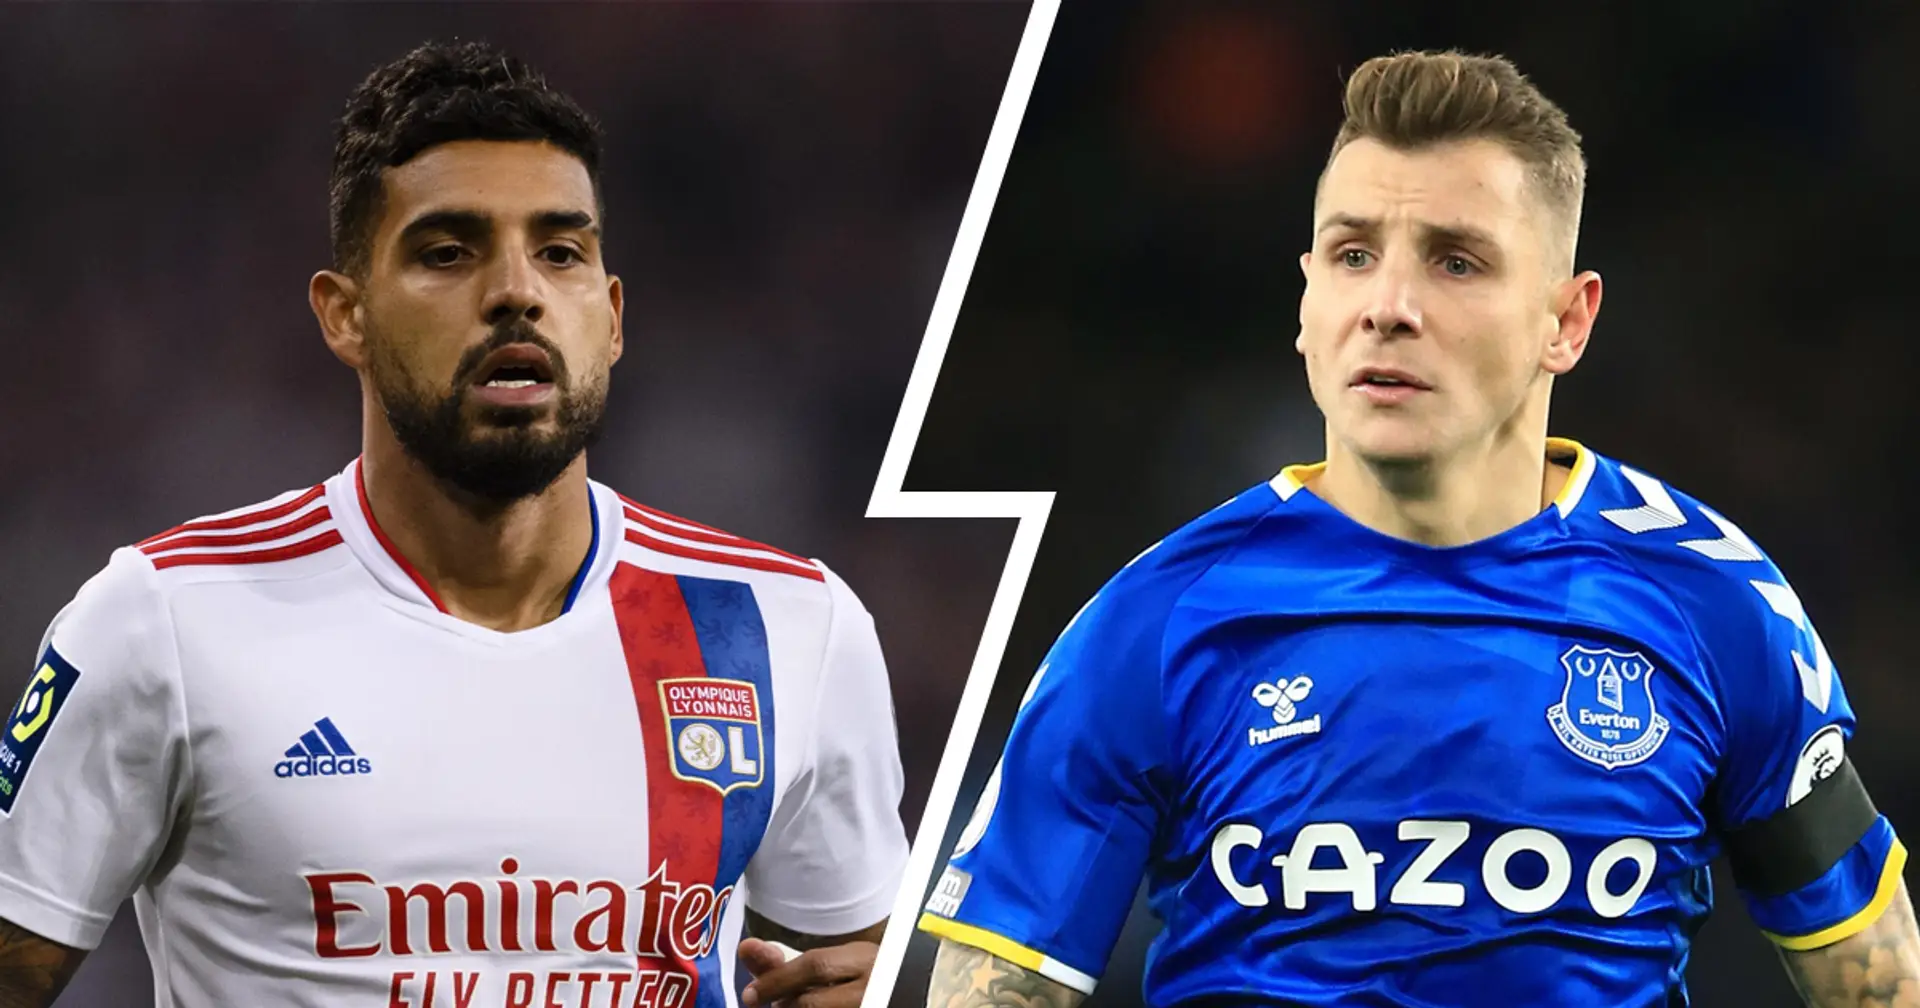 Chelsea keep pushing for Emerson recall, Lucas Digne deal 'very unlikely' - Fabrizio Romano (reliability: 5 stars)